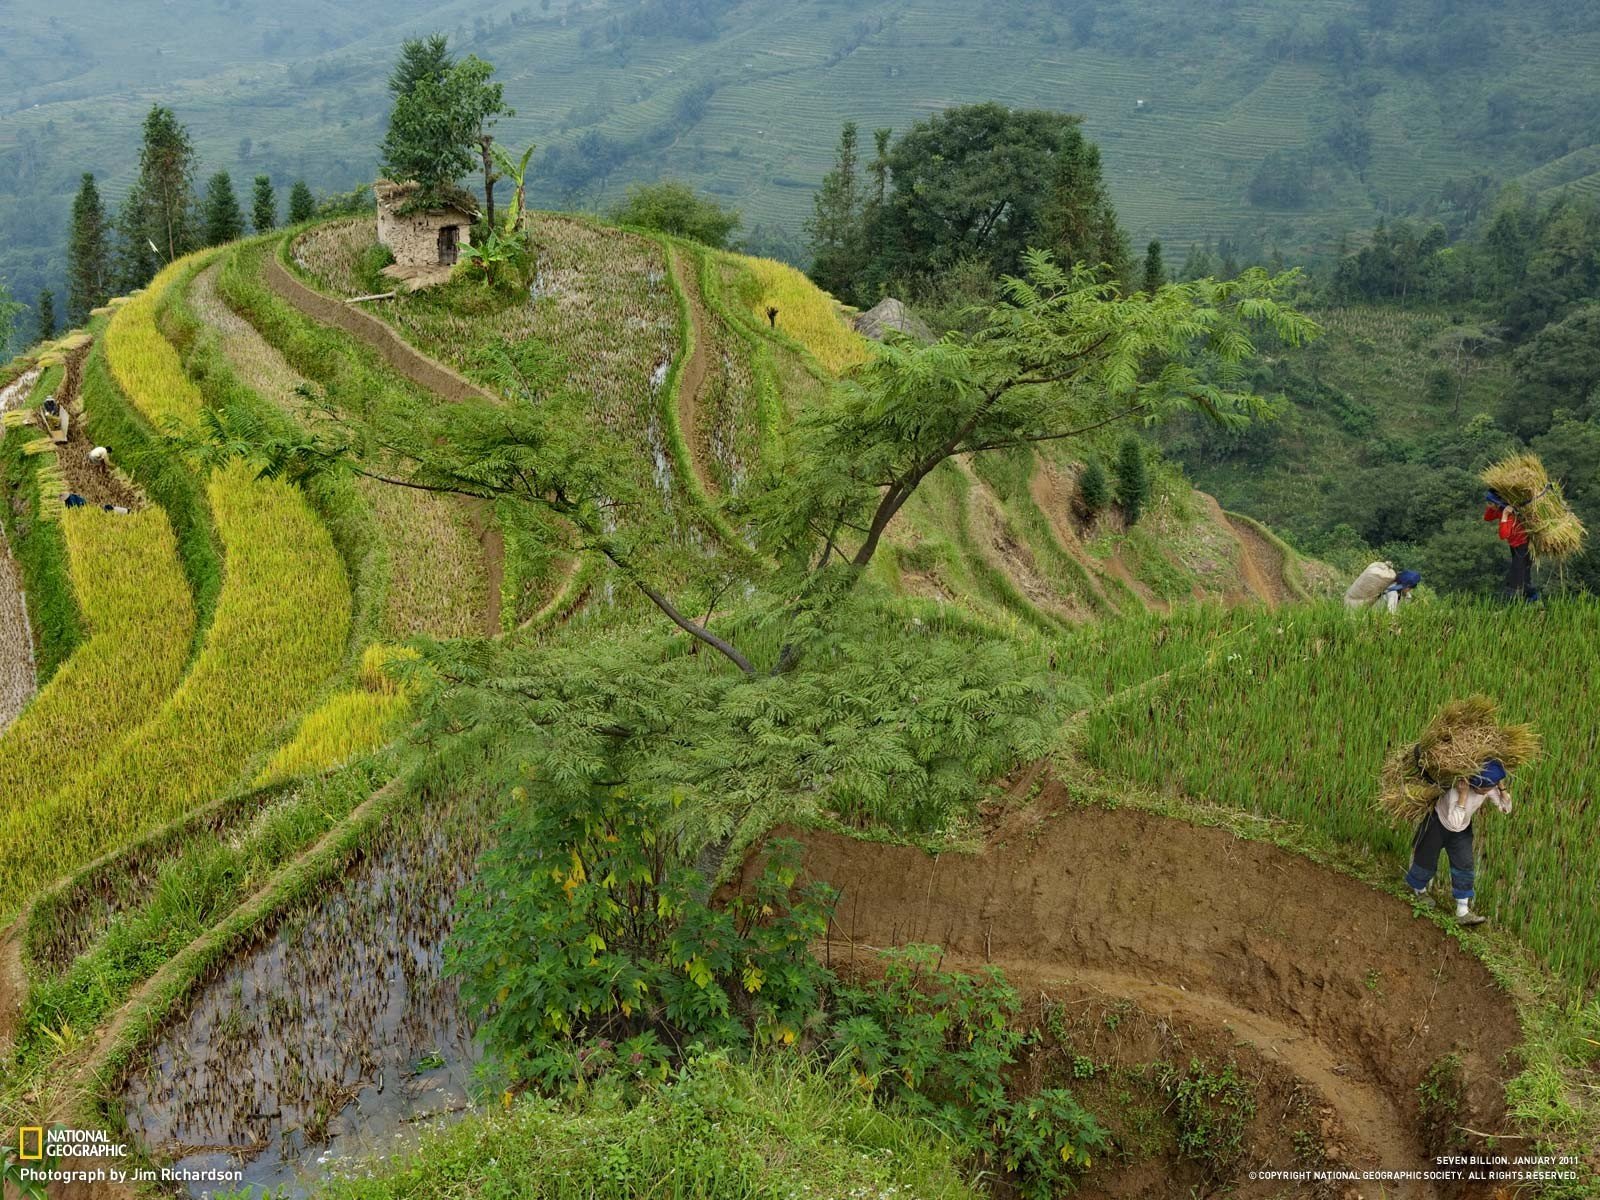 National Geographic, Terraces, Farm, Peasants, Rice paddy, China Wallpaper